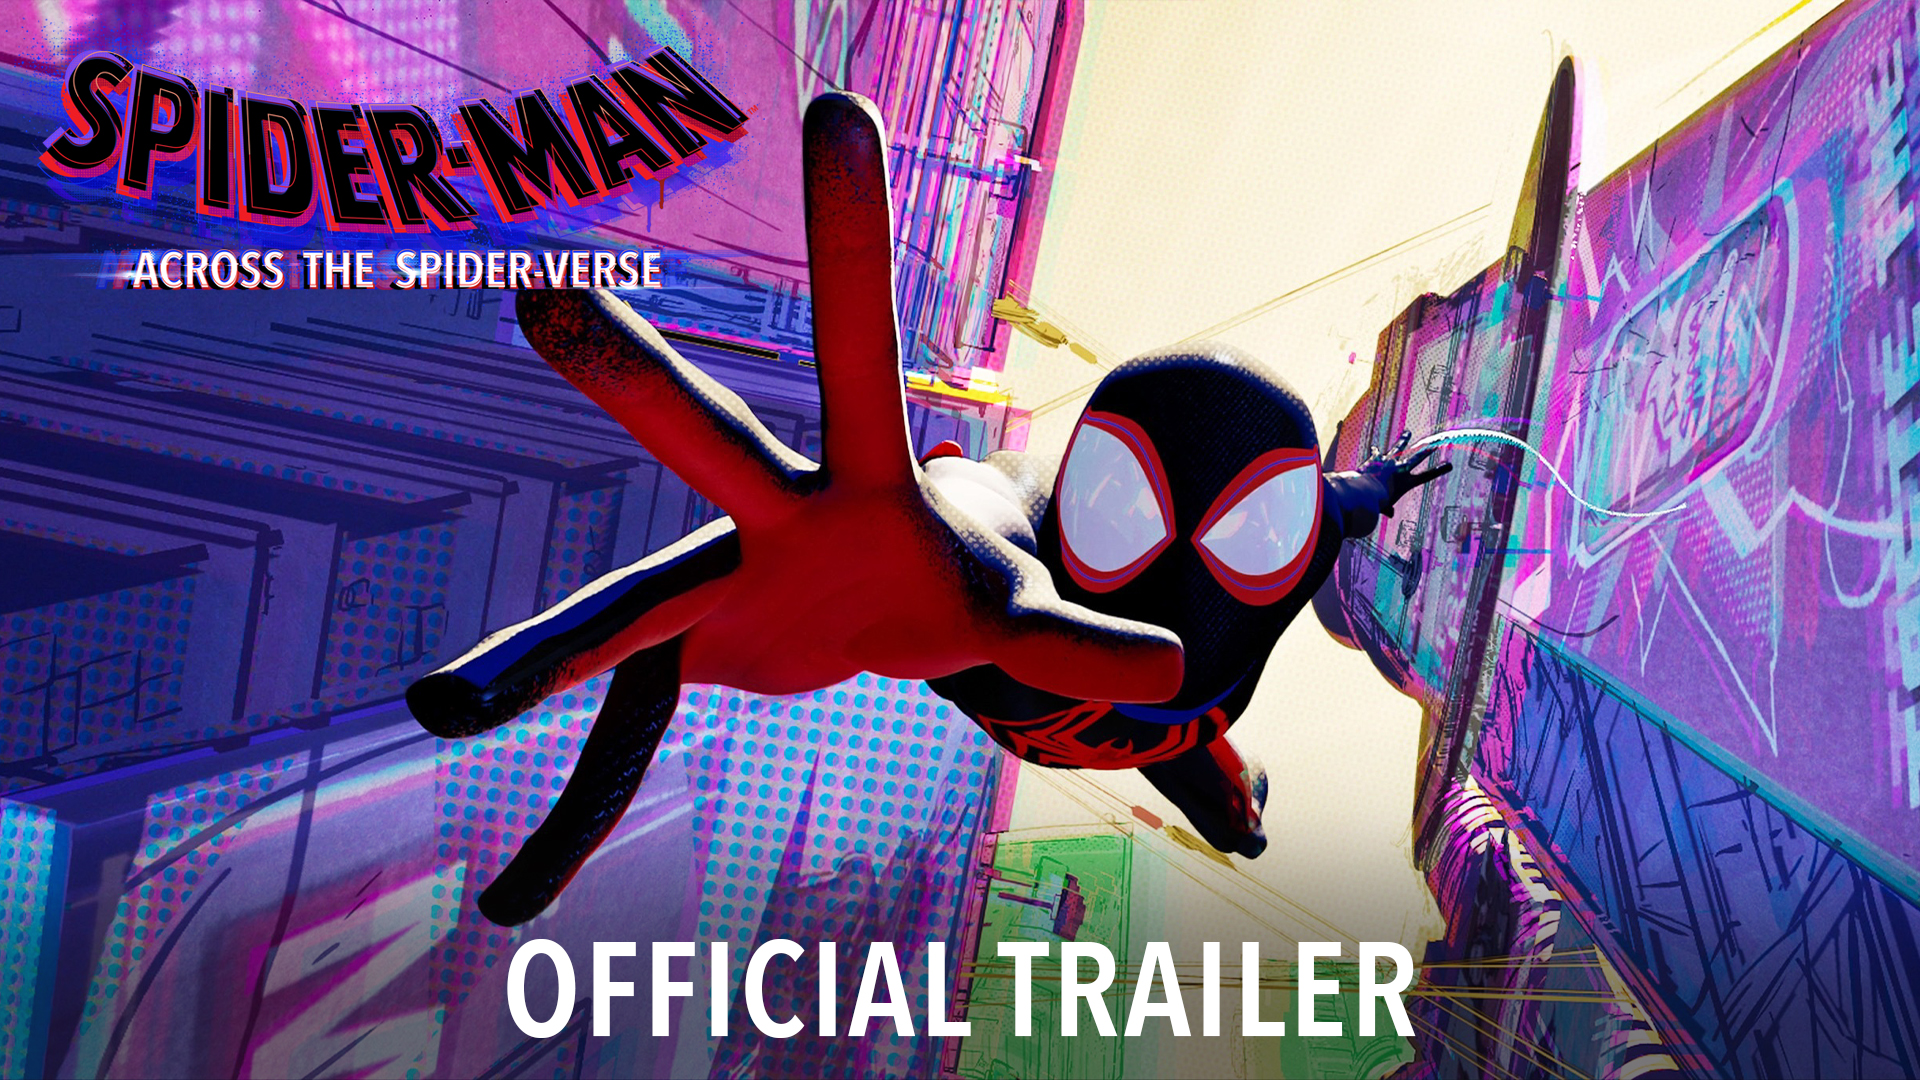 Spider-Man: Across The Spider-Verse on Twitter: "One Spider-Man wants to change his own destiny. 🕷 Miles Morales returns for the next Spider-Man movie, in theaters 2. Watch the new trailer